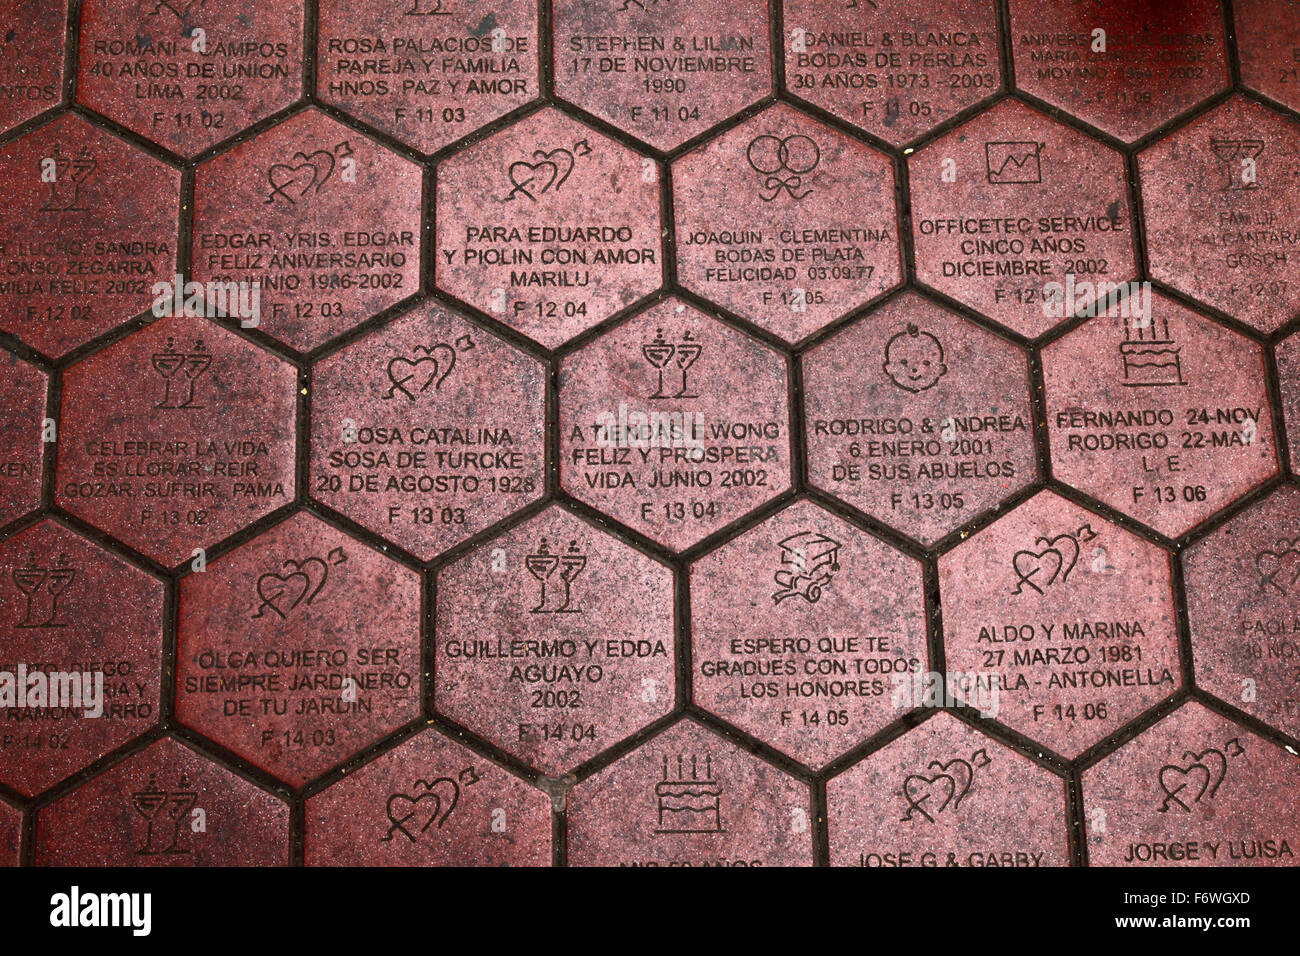 Tiles with names of donors on paved pedestrian street in Chinatown / Barrio Chino, Lima, Peru Stock Photo